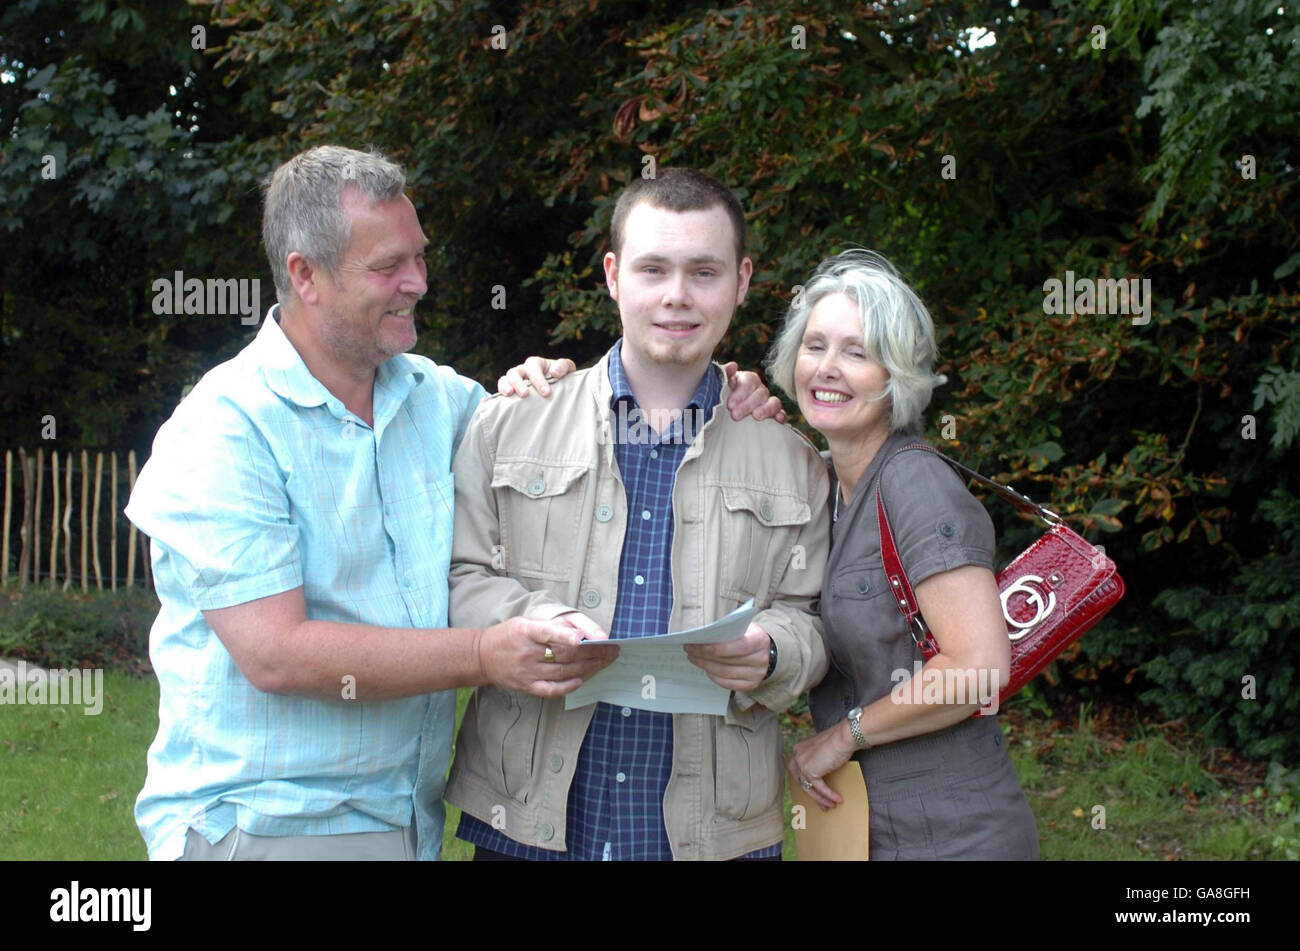 A-level results announced. Jos Gibbons with his parents Neil and Susan as he gets his A Level results in Birmingham. Stock Photo